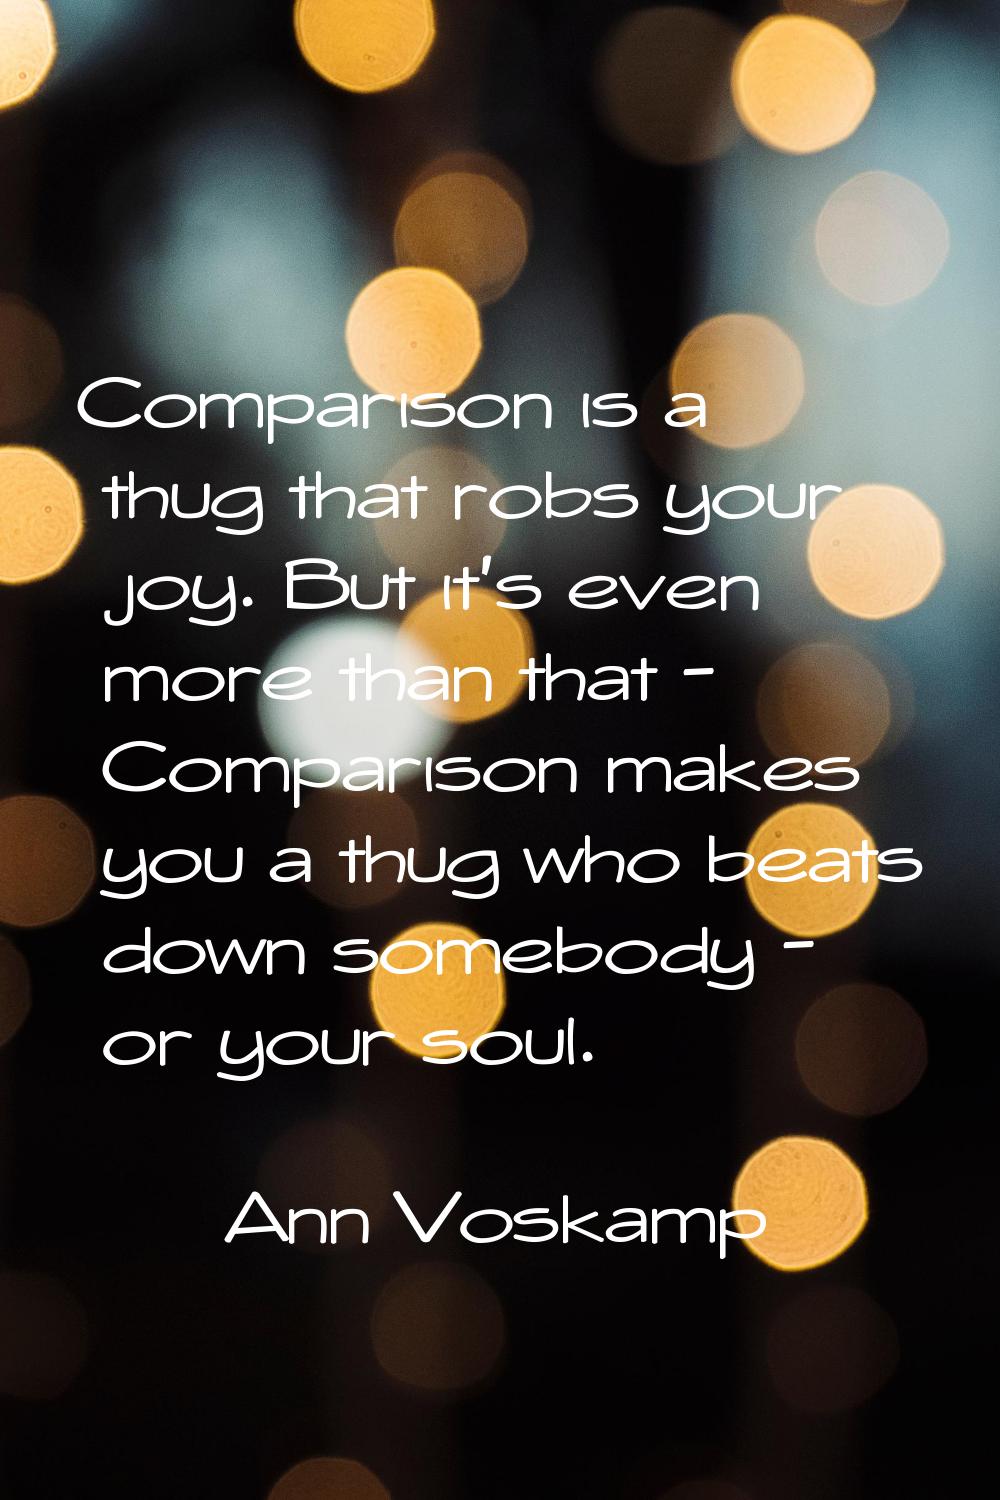 Comparison is a thug that robs your joy. But it's even more than that - Comparison makes you a thug